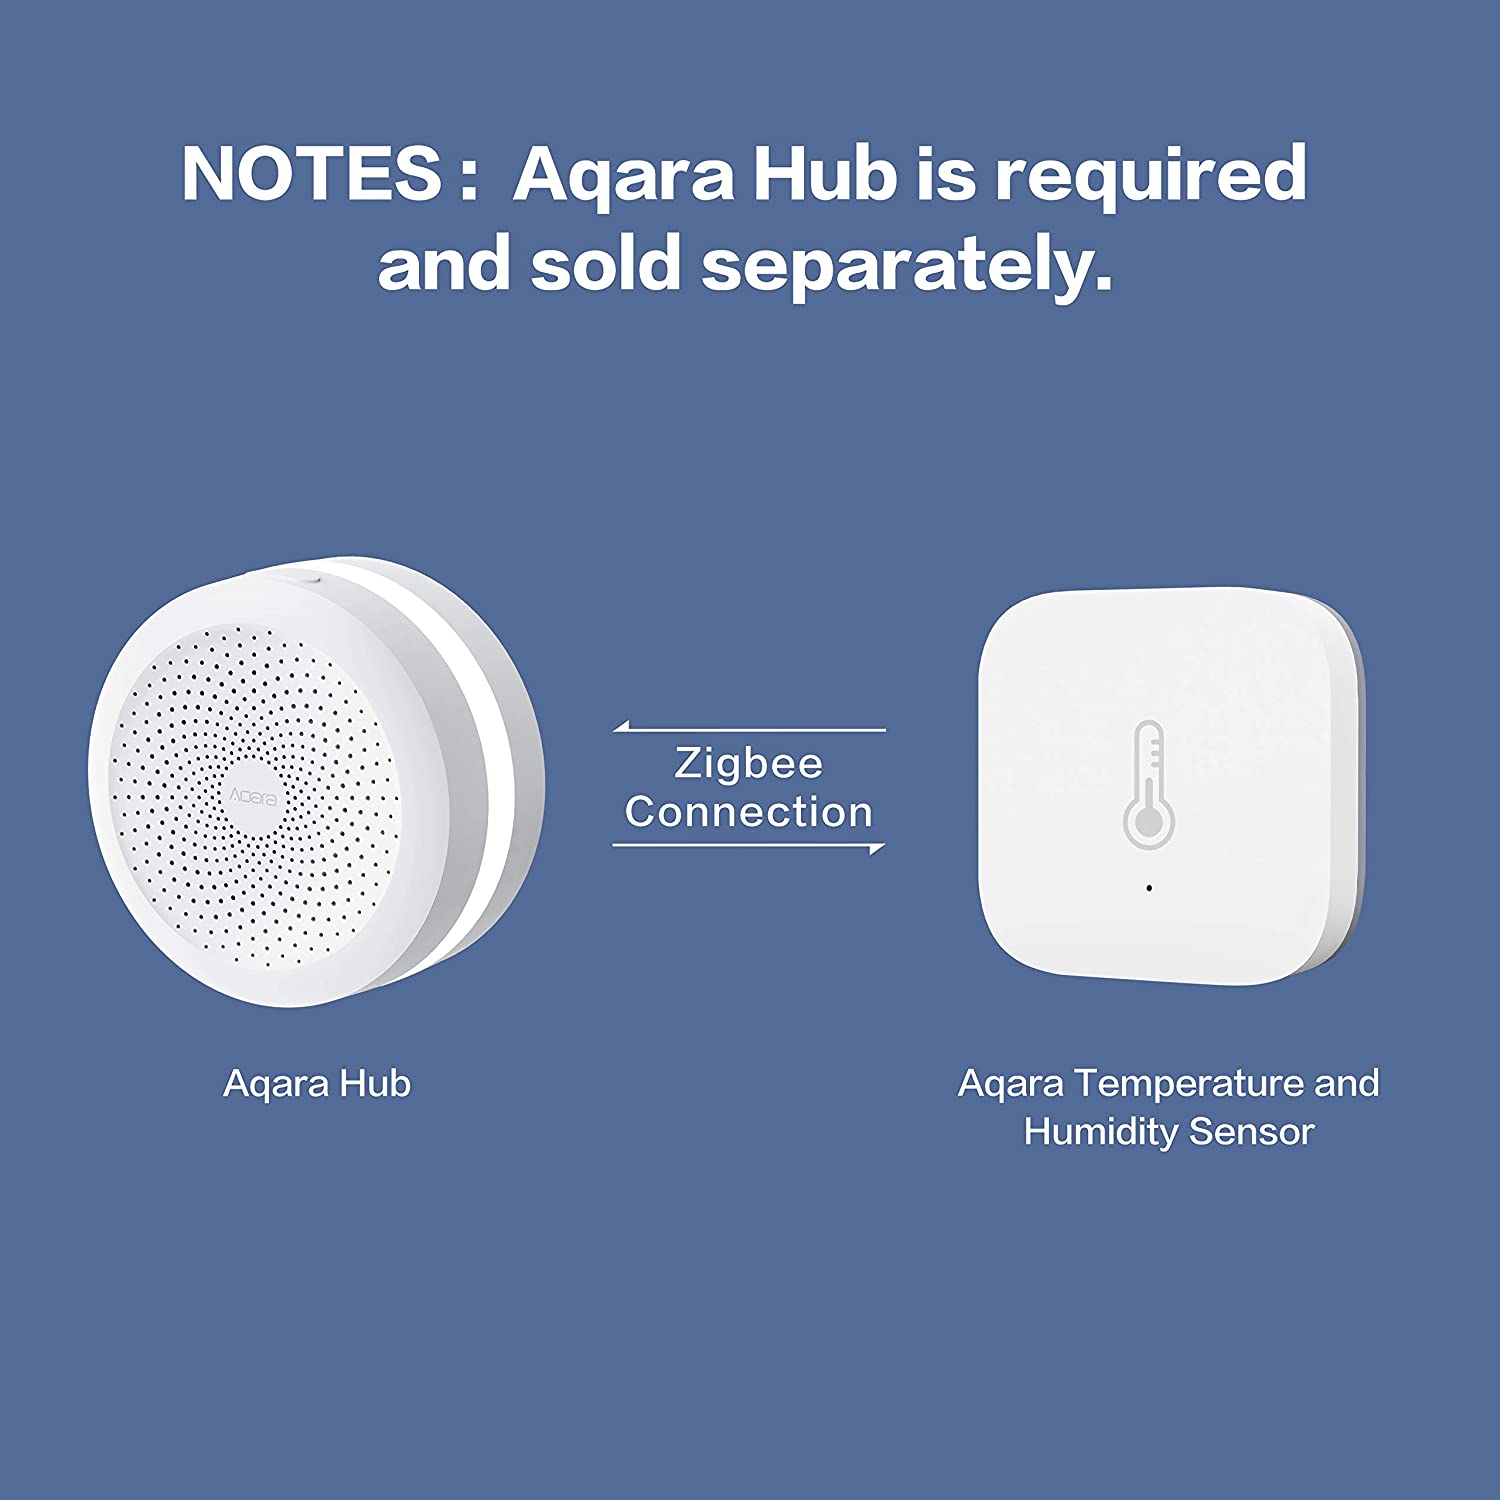 How to use Aqara Hub M2 devices in Home Assistant? - Hardware